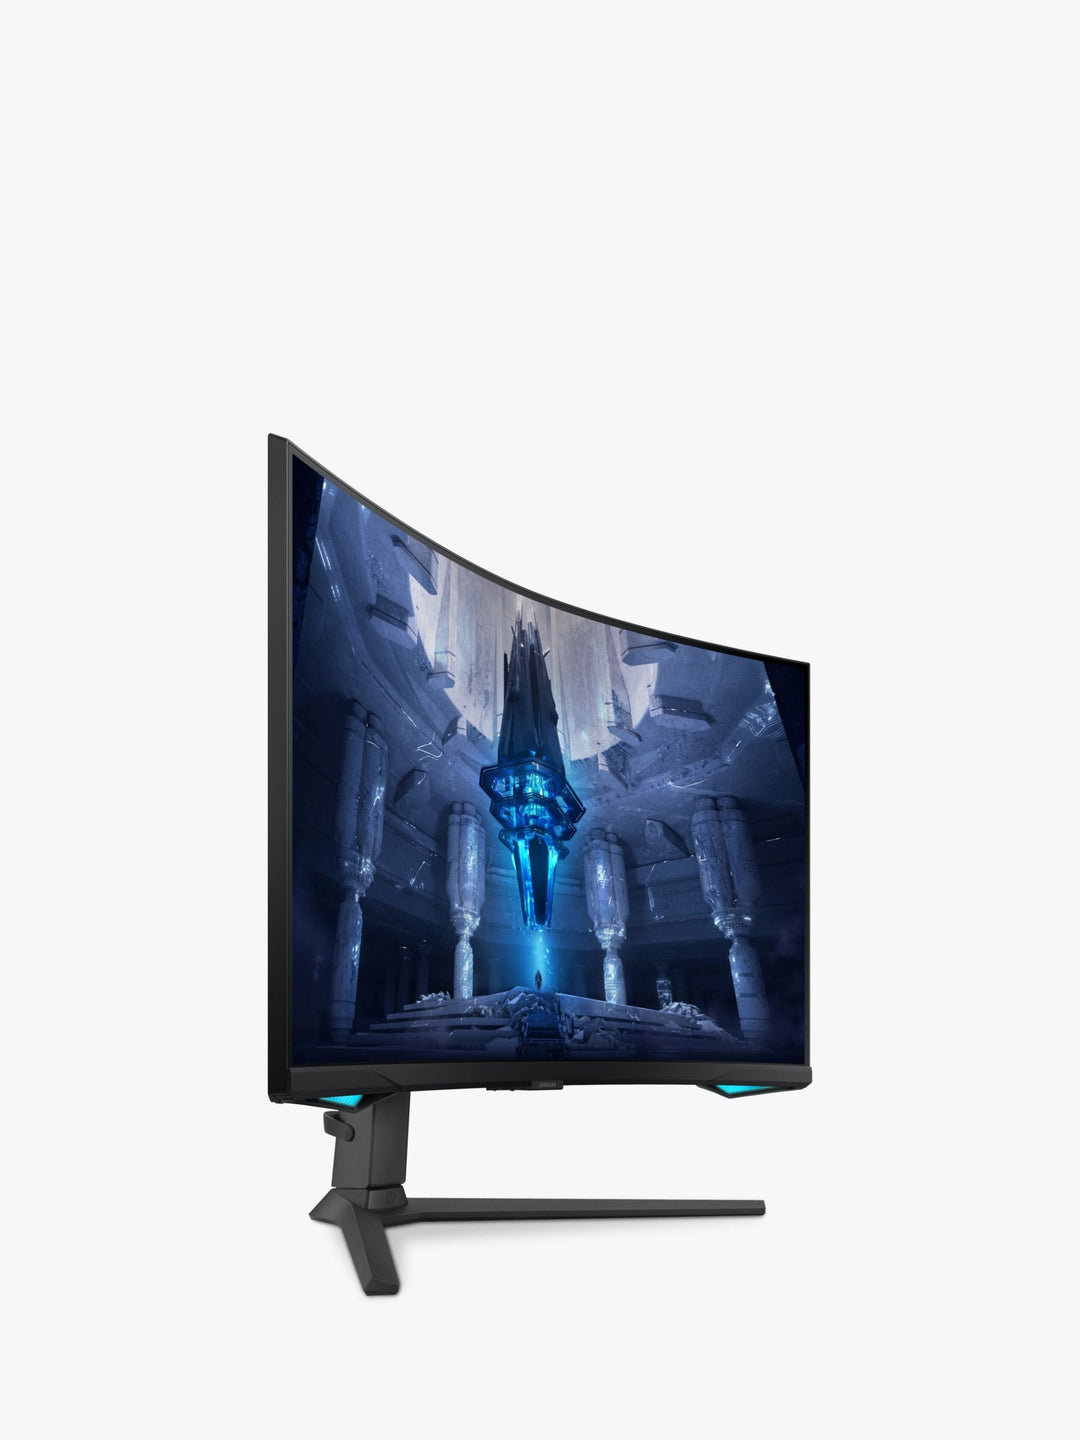 'Samsung Odyssey Neo G7 32" Curved Gaming Monitor 4K UHD, Quantum HDR 2000, 165Hz, 1ms, FreeSync Pro'